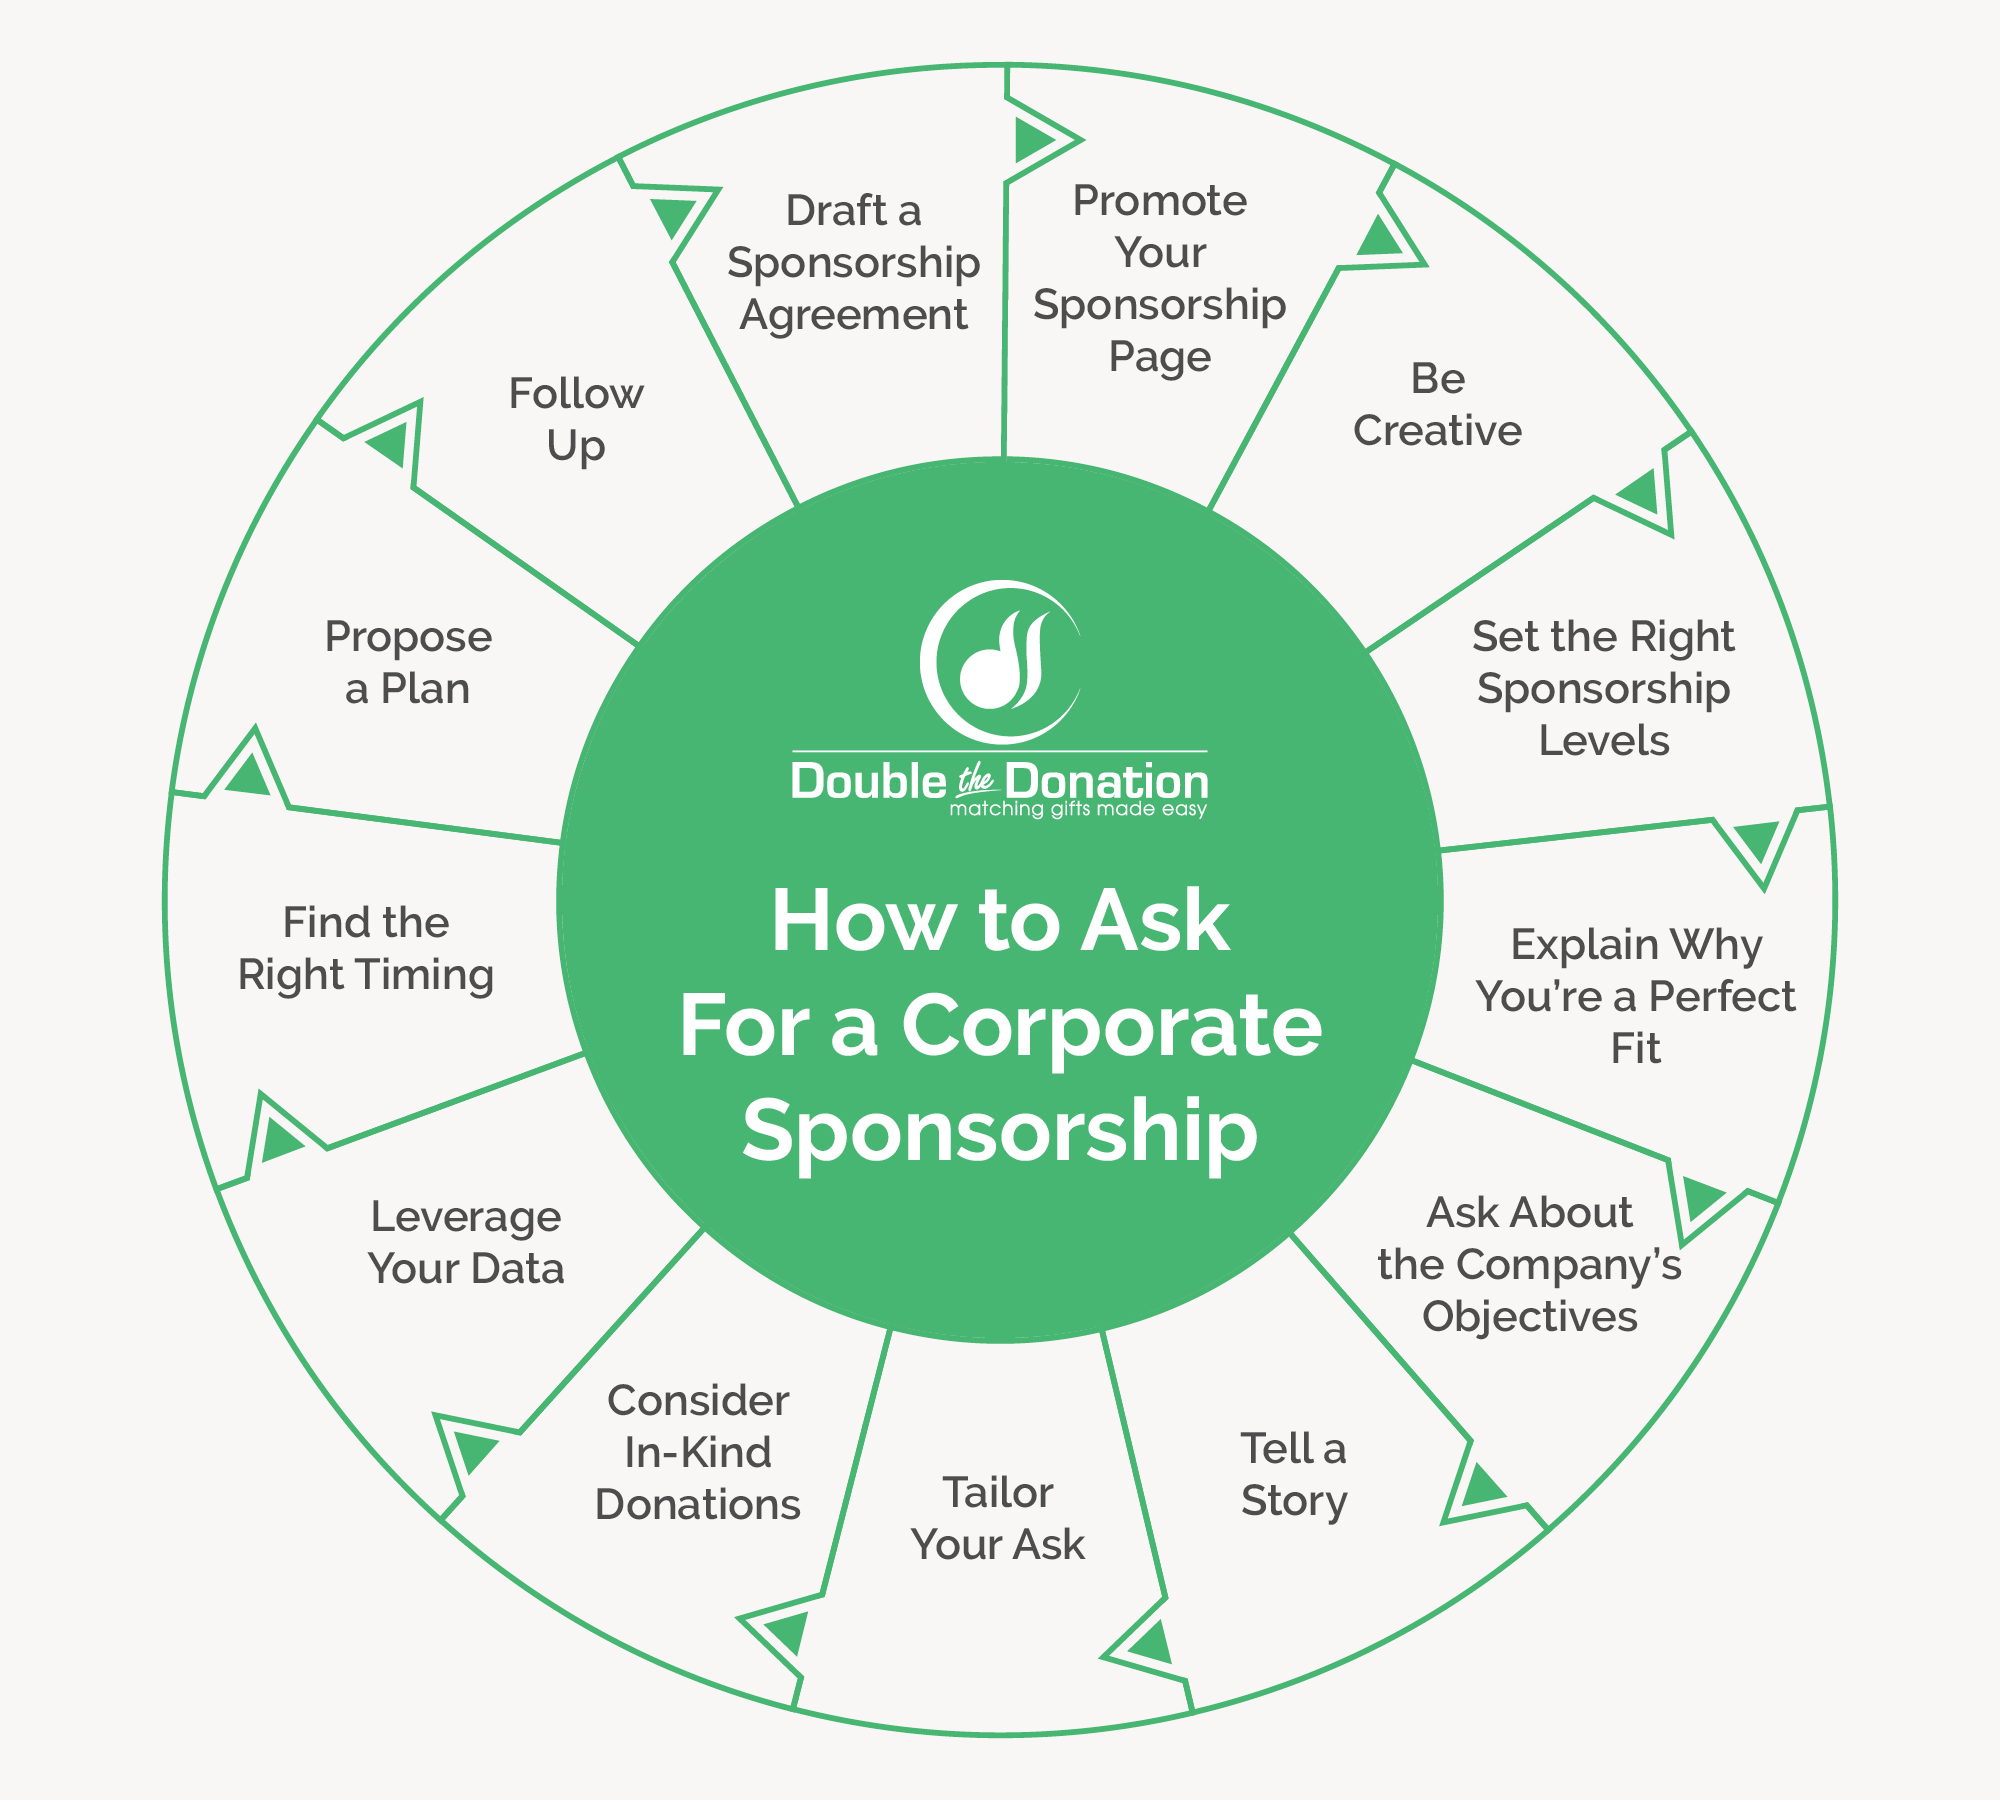 This image and the following text show a variety of ways you can effectively ask for a corporate sponsorship.